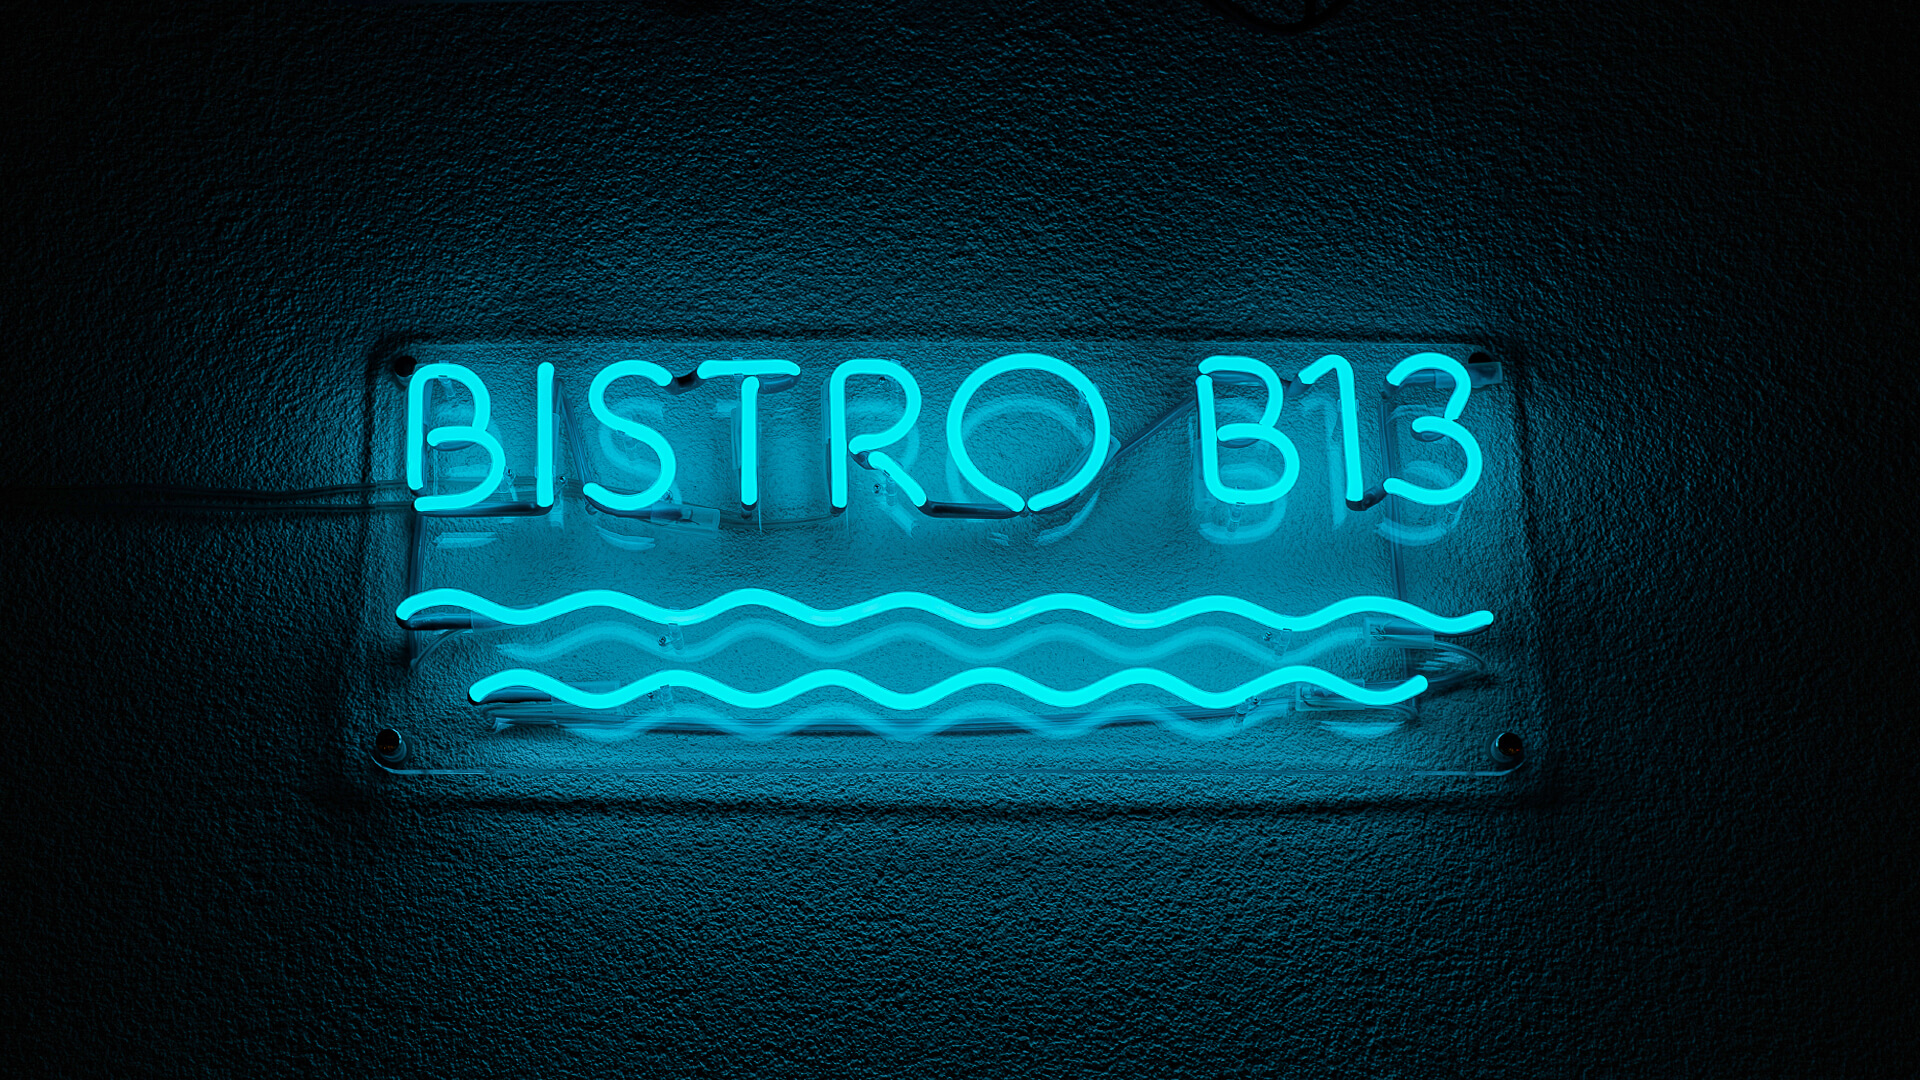 Bistro B13 - Blue neon Bistro sign, with waves under the lettering.